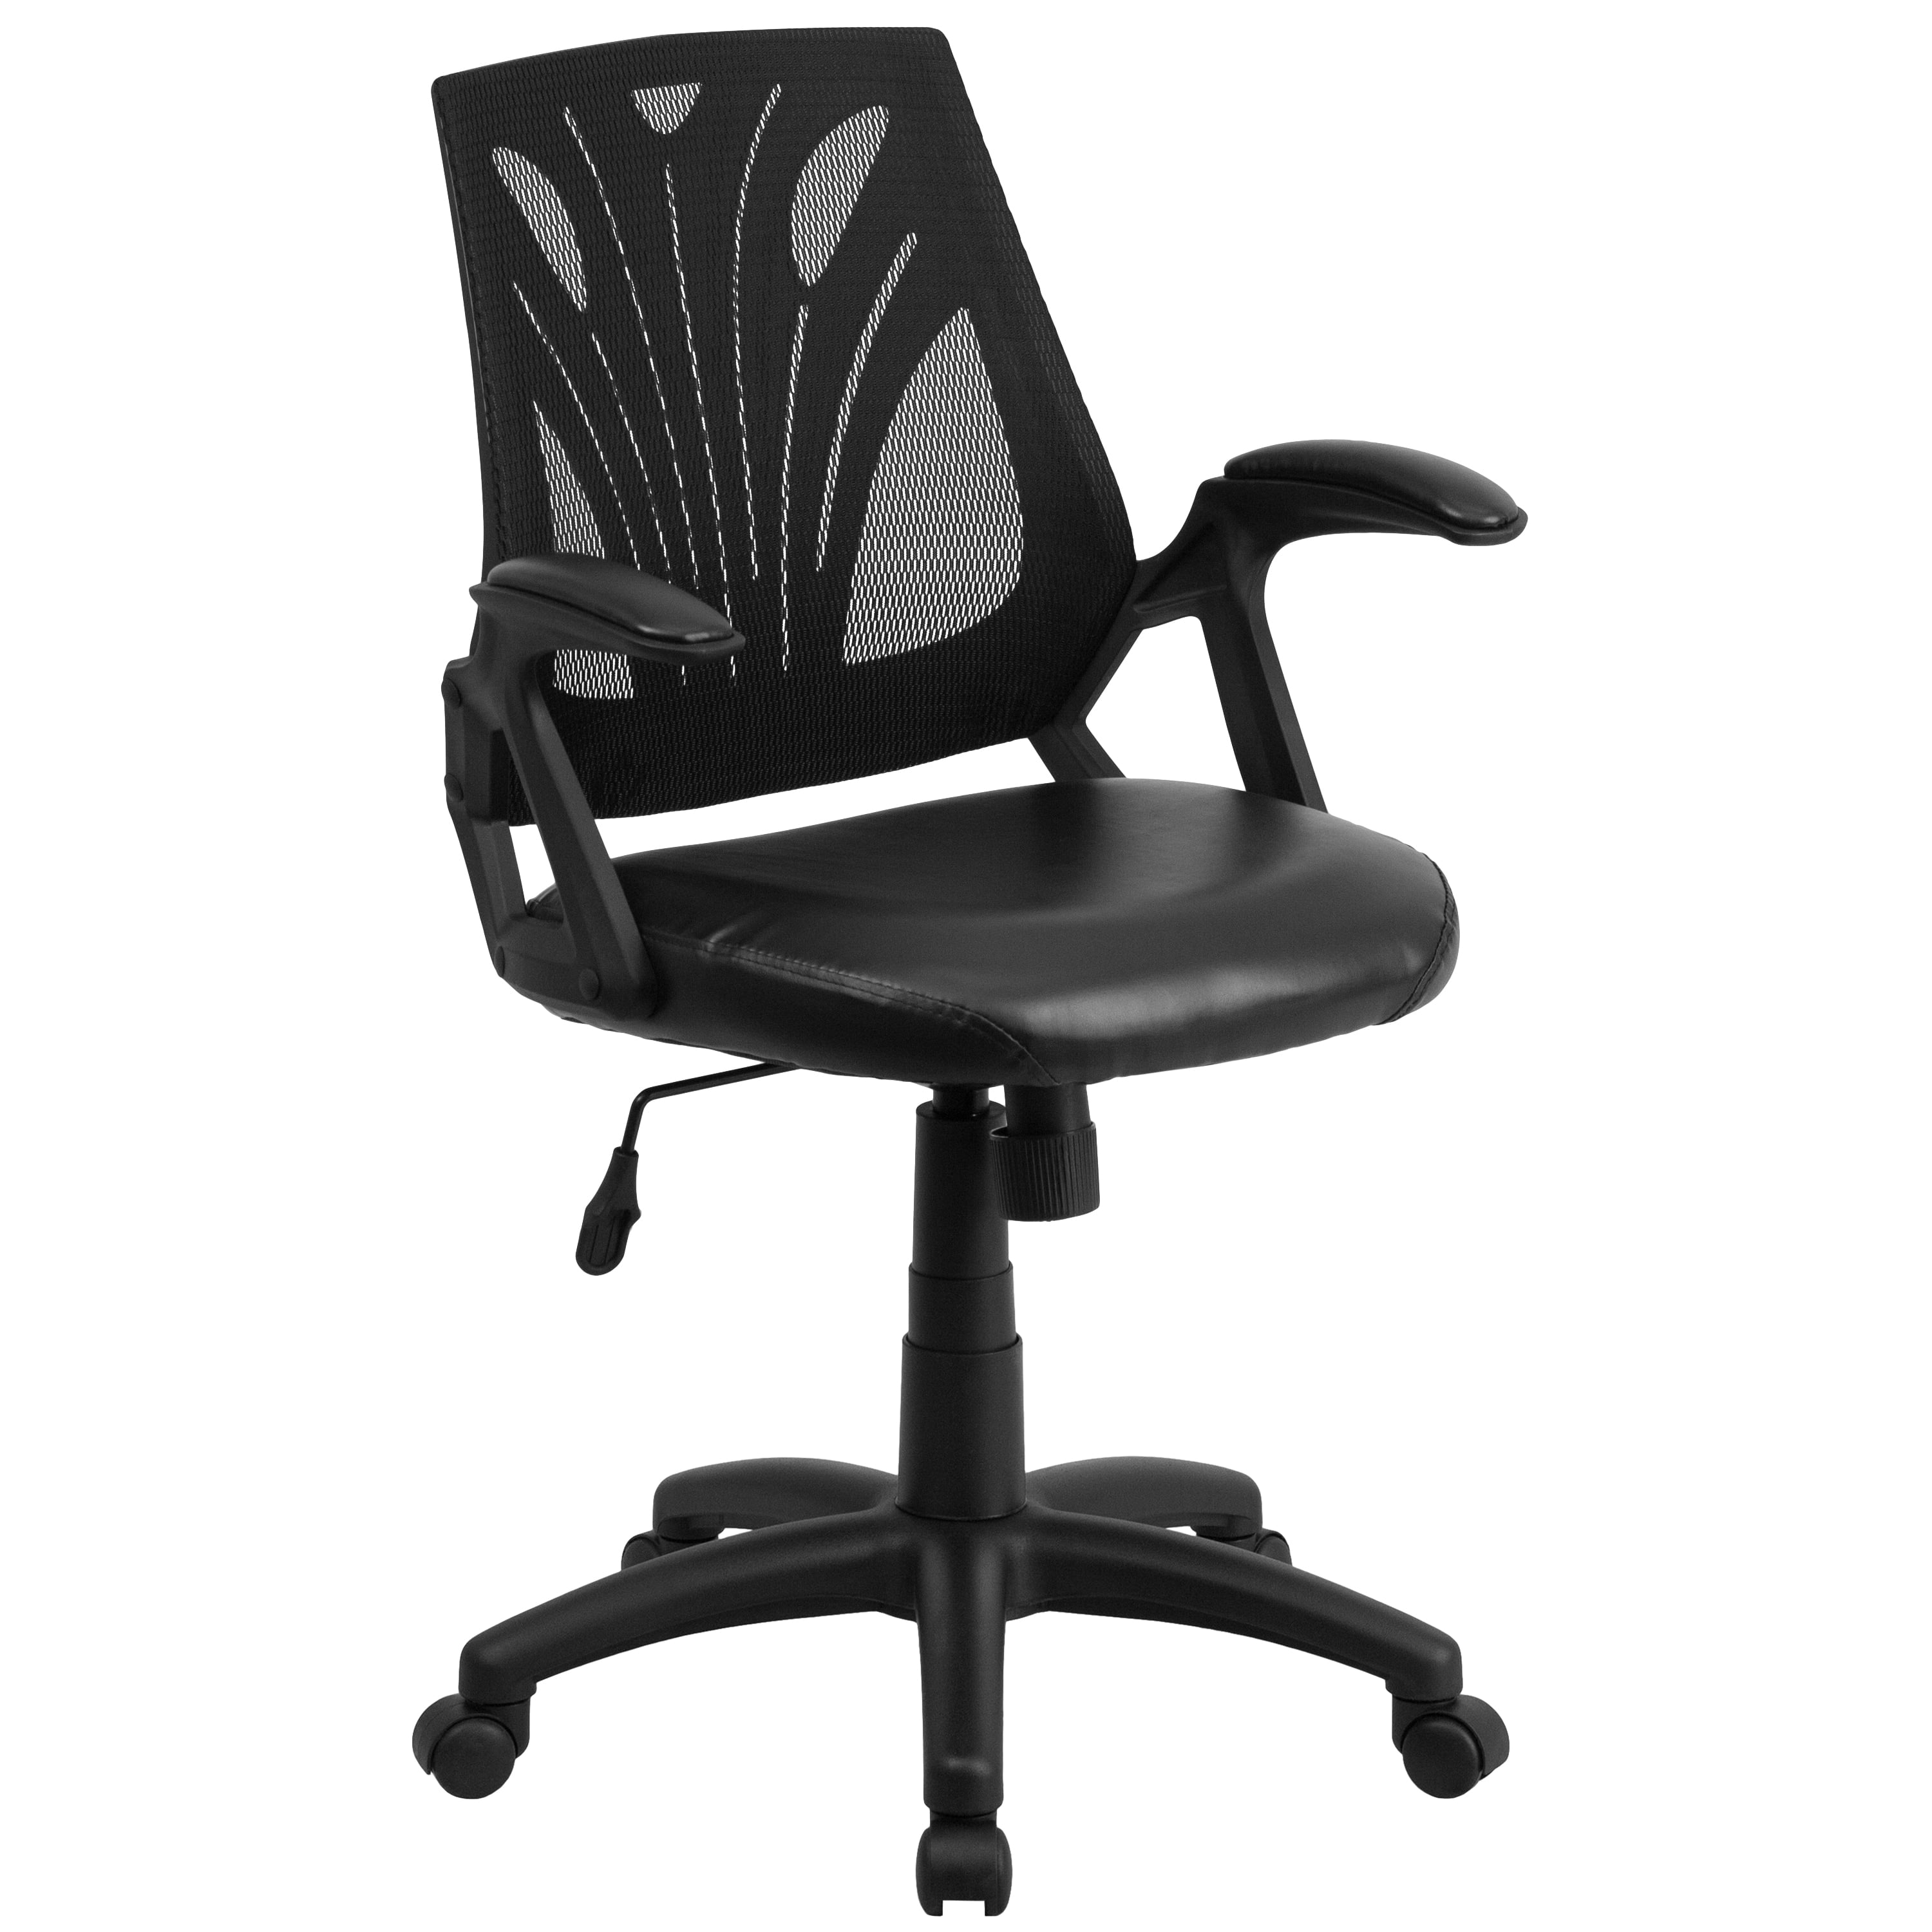 A Line Furniture Kai Black Mesh Swivel Adjustable Office Chair with Leather Padded Seat -Brand New